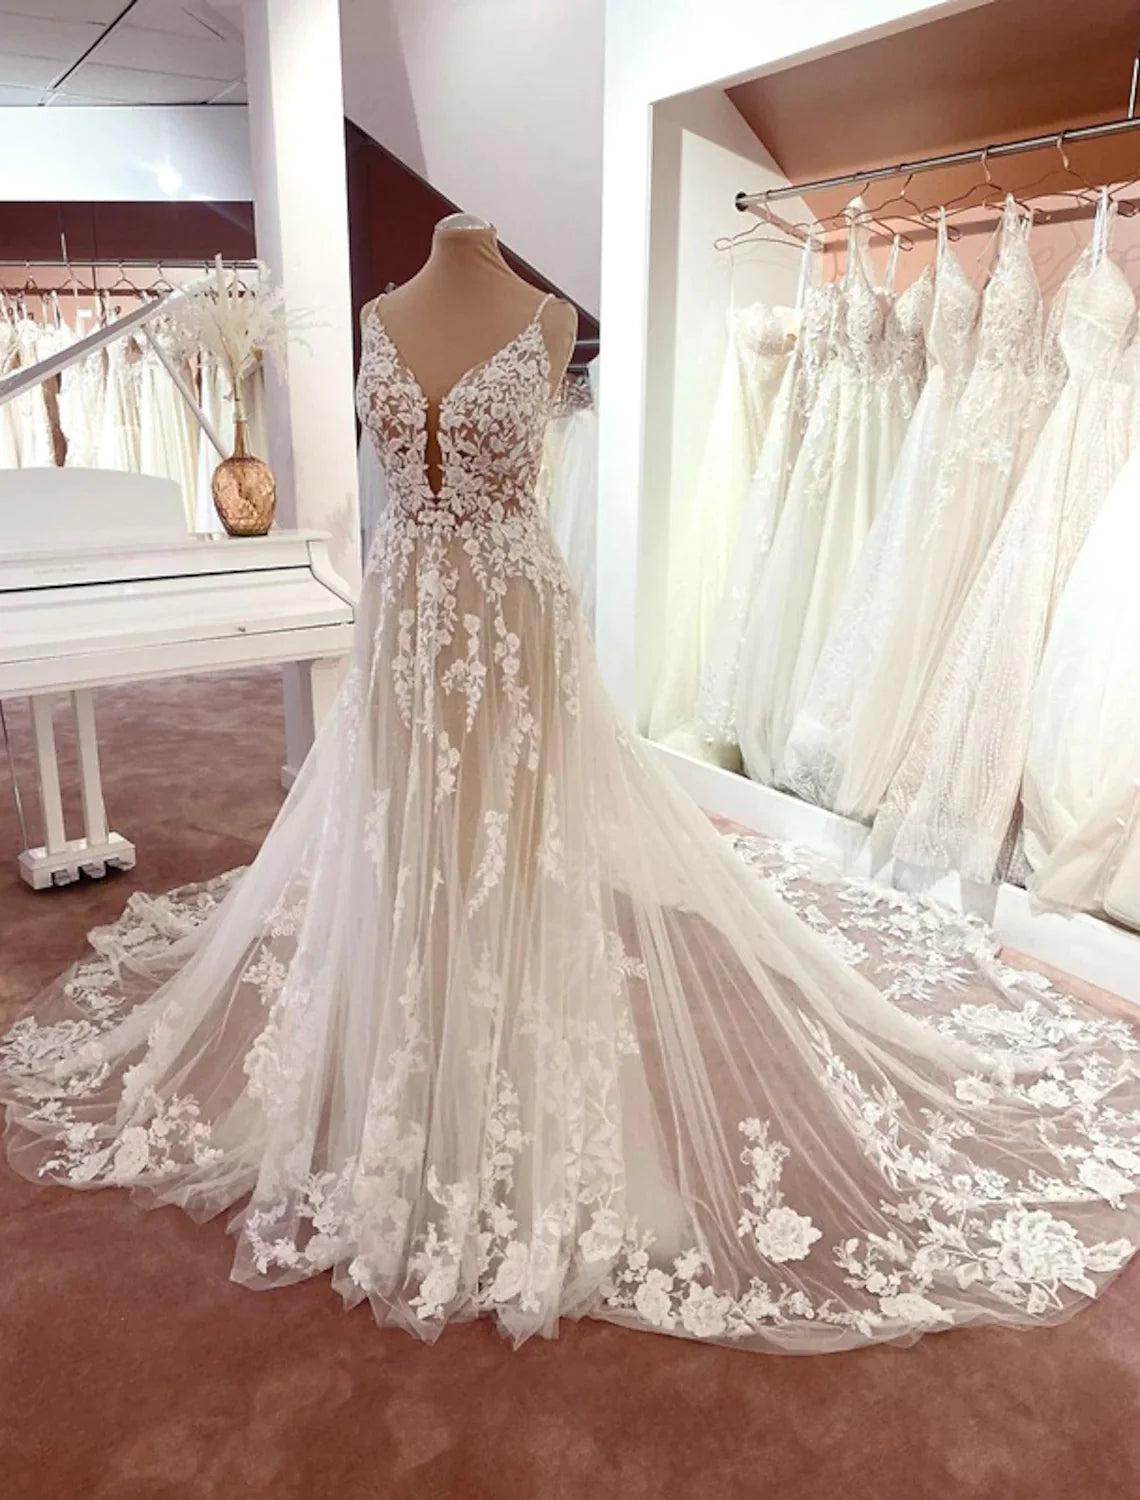 Engagement Formal Wedding Dresses A-Line Sleeveless Strap Lace